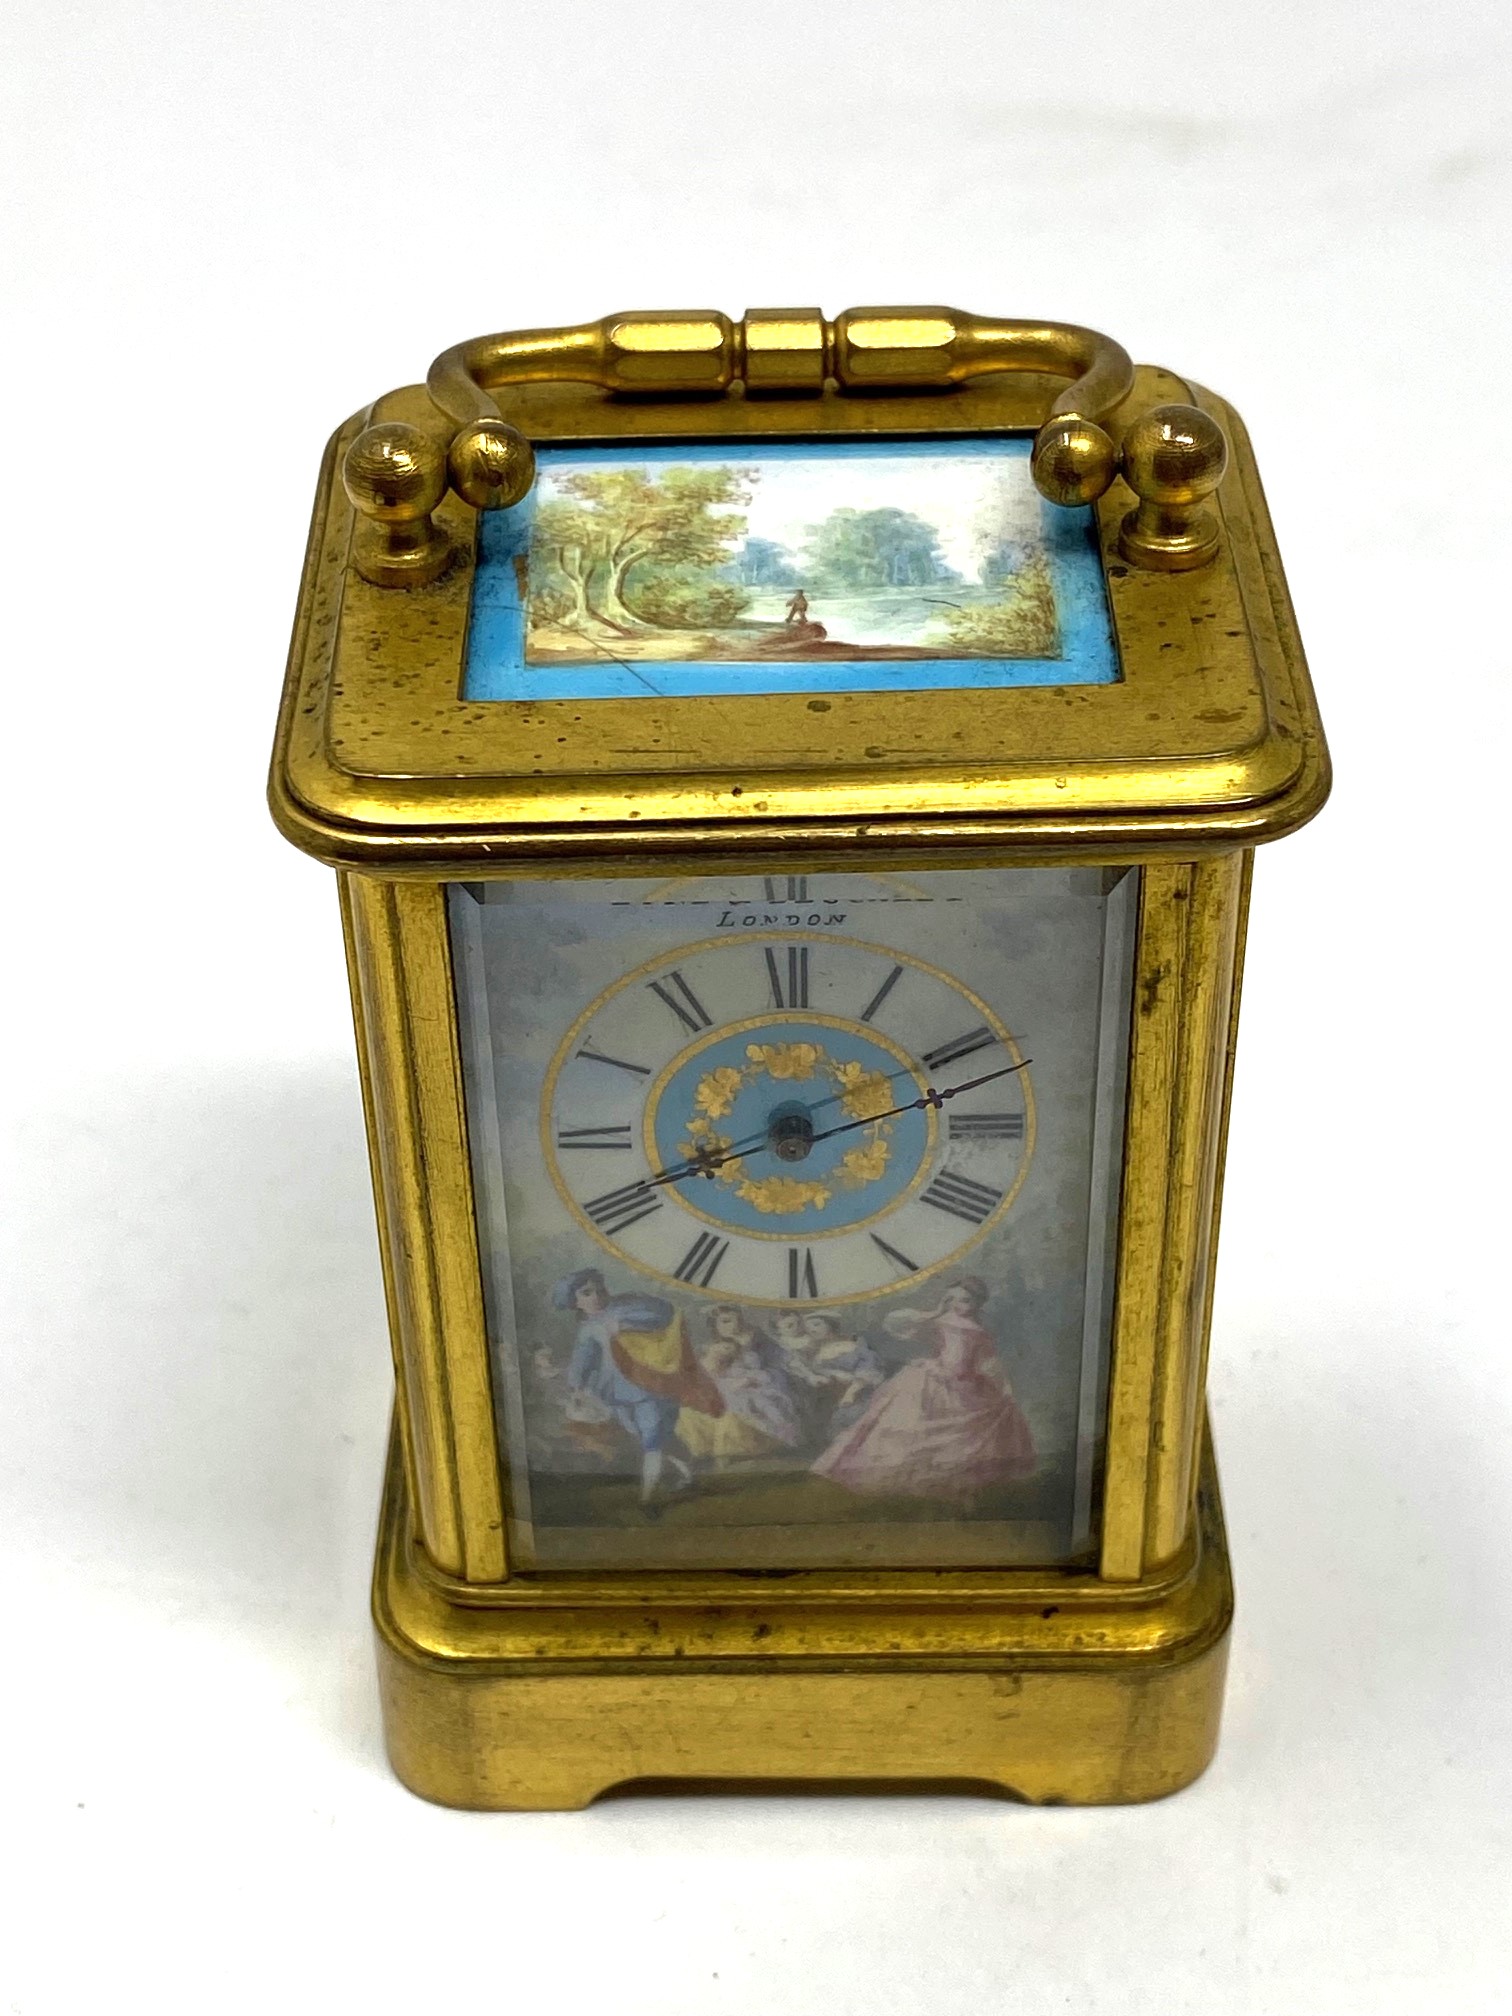 A FRENCH GILT-BRASS AND ENAMEL MINIATURE CARRIAGE CLOCK, PERHAPS J. DEJARDIN, PARIS, FOR RETAIL BY - Image 3 of 8